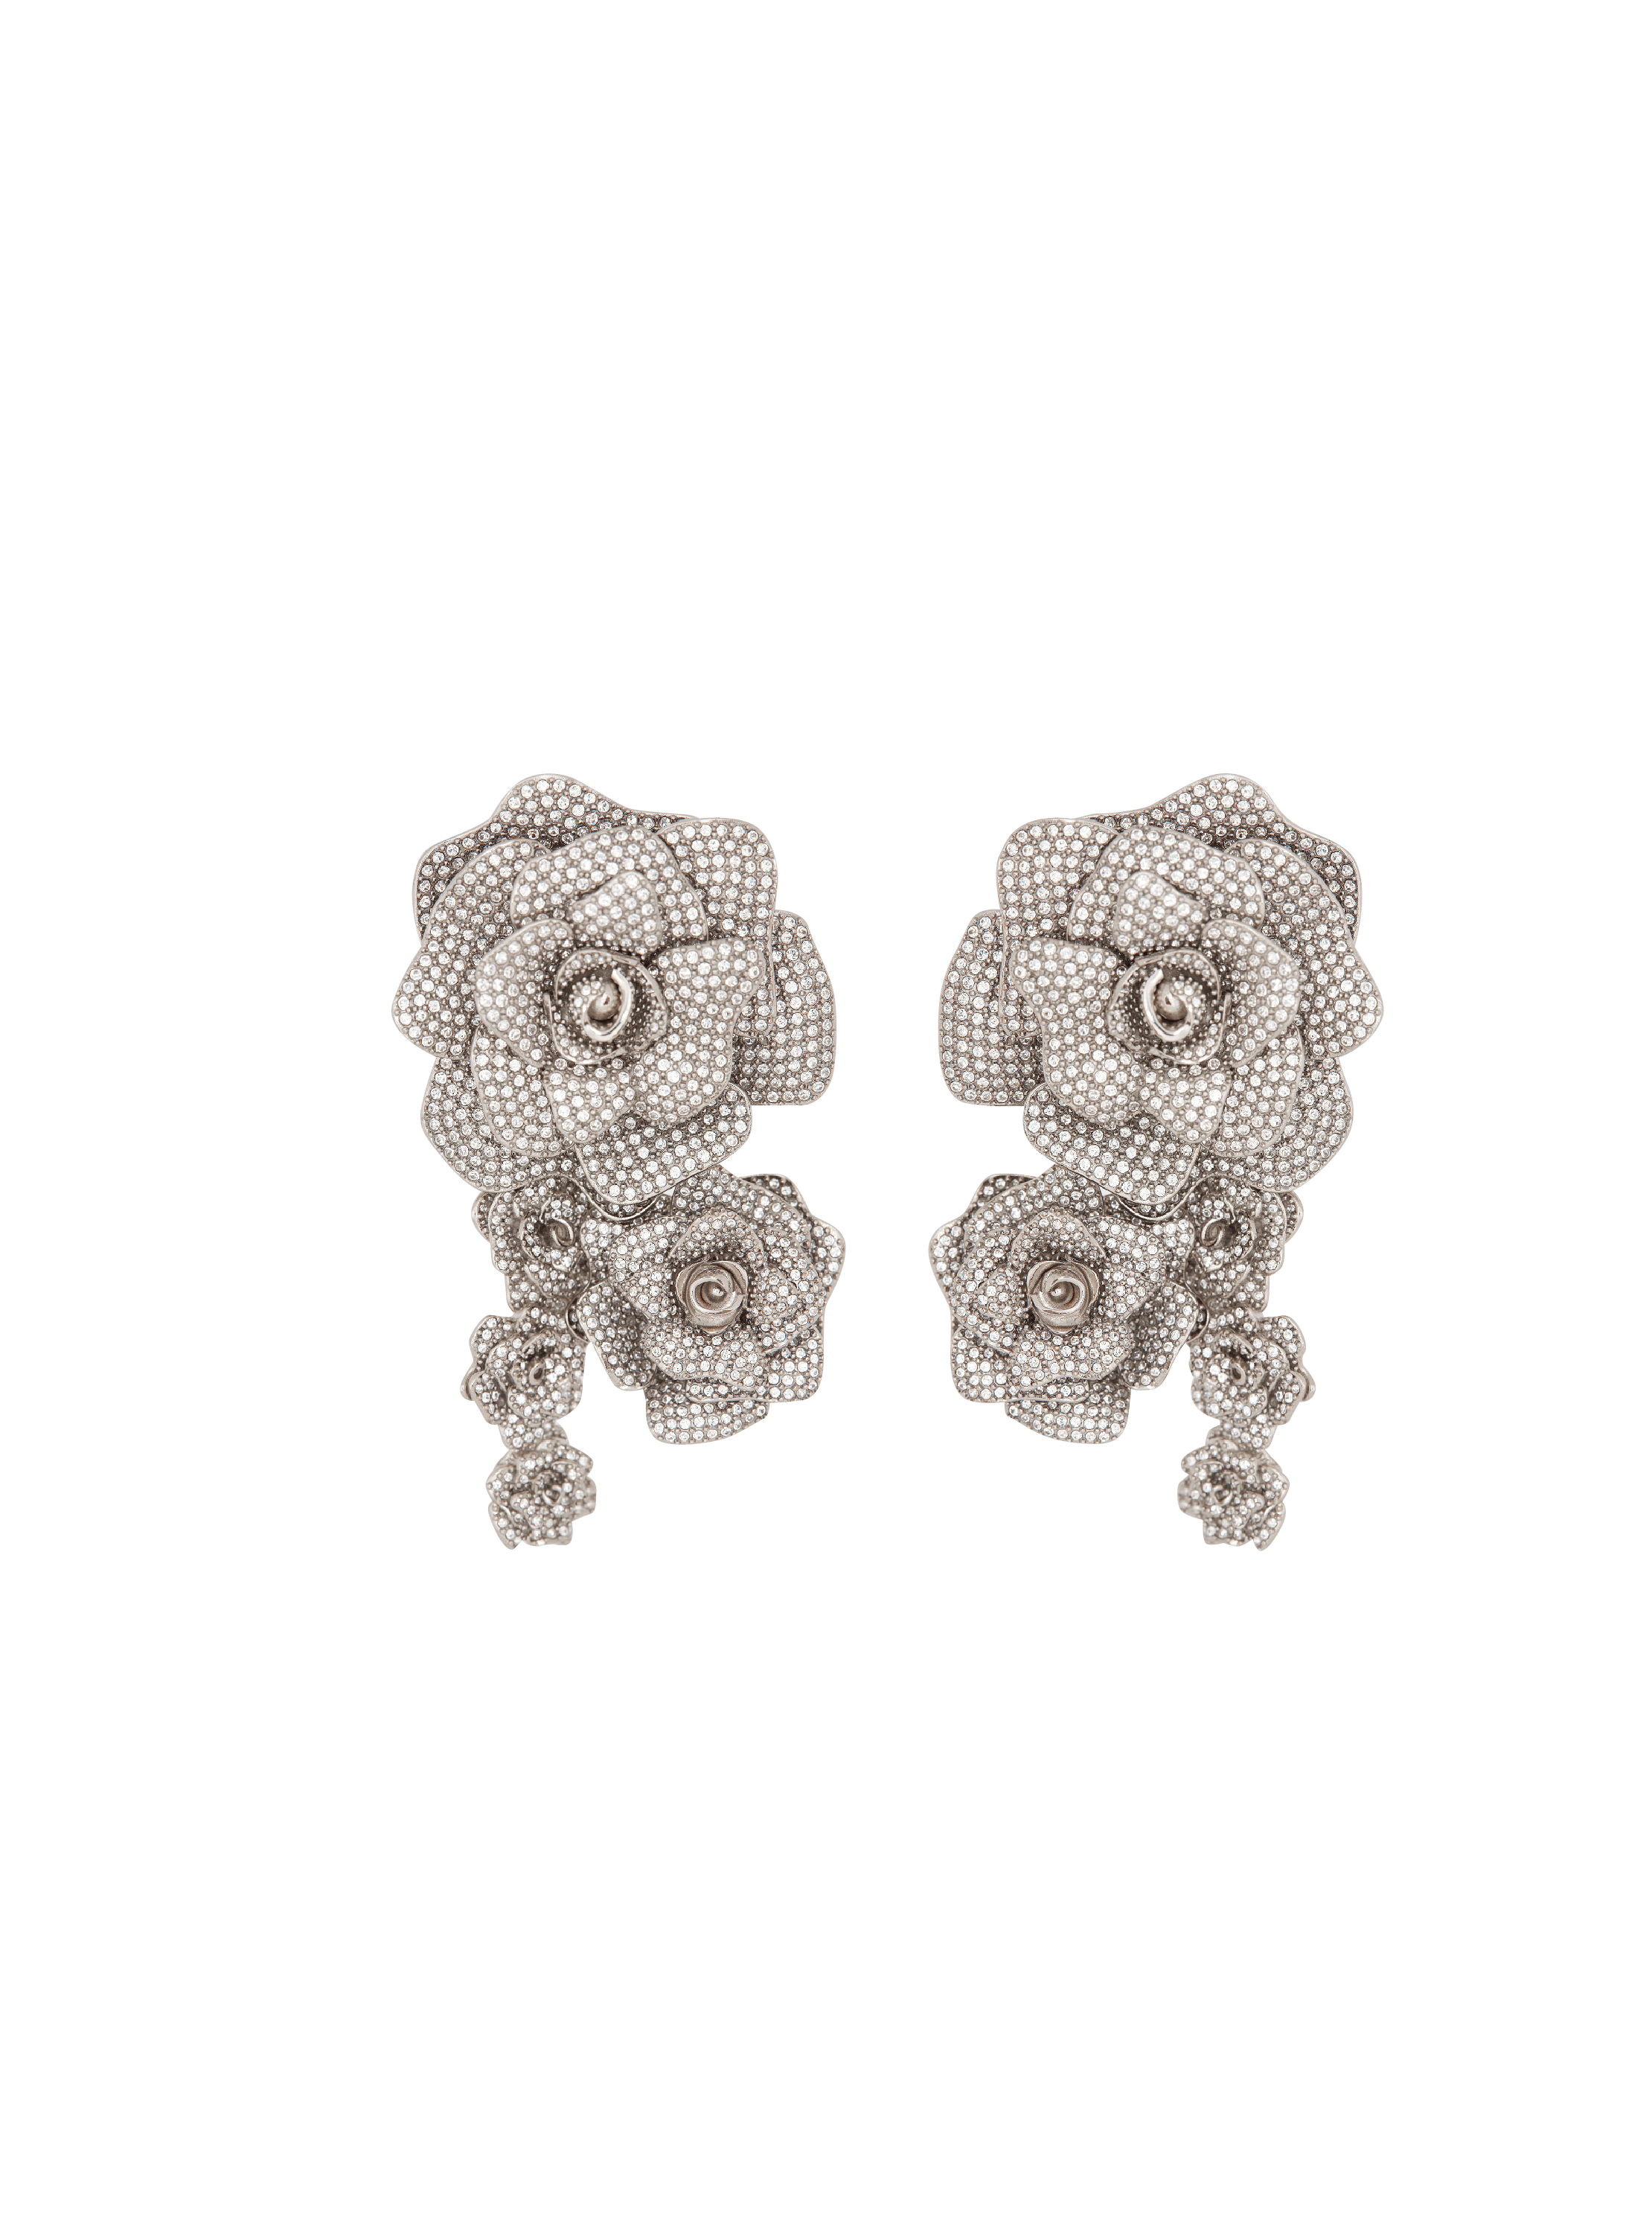 Palladium Rose earrings set with crystals